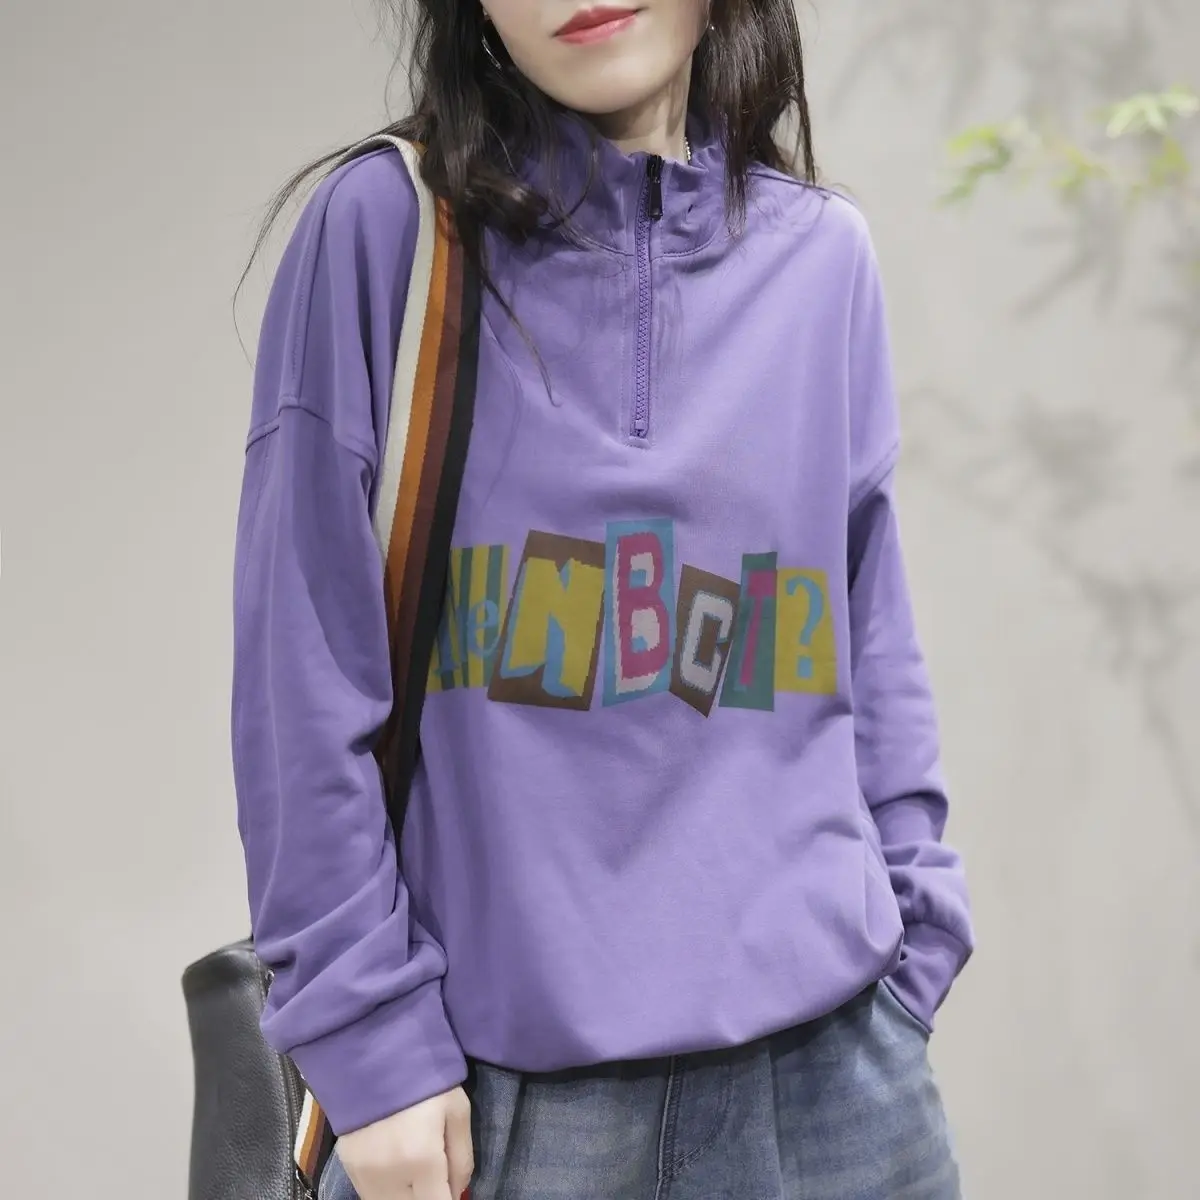 

Top with Orint on Purple Text Zipper Woman Clothing Hip Hop Full Zip Up Women's Sweatshirt Letter Printing Emo Kpop Dropshiping